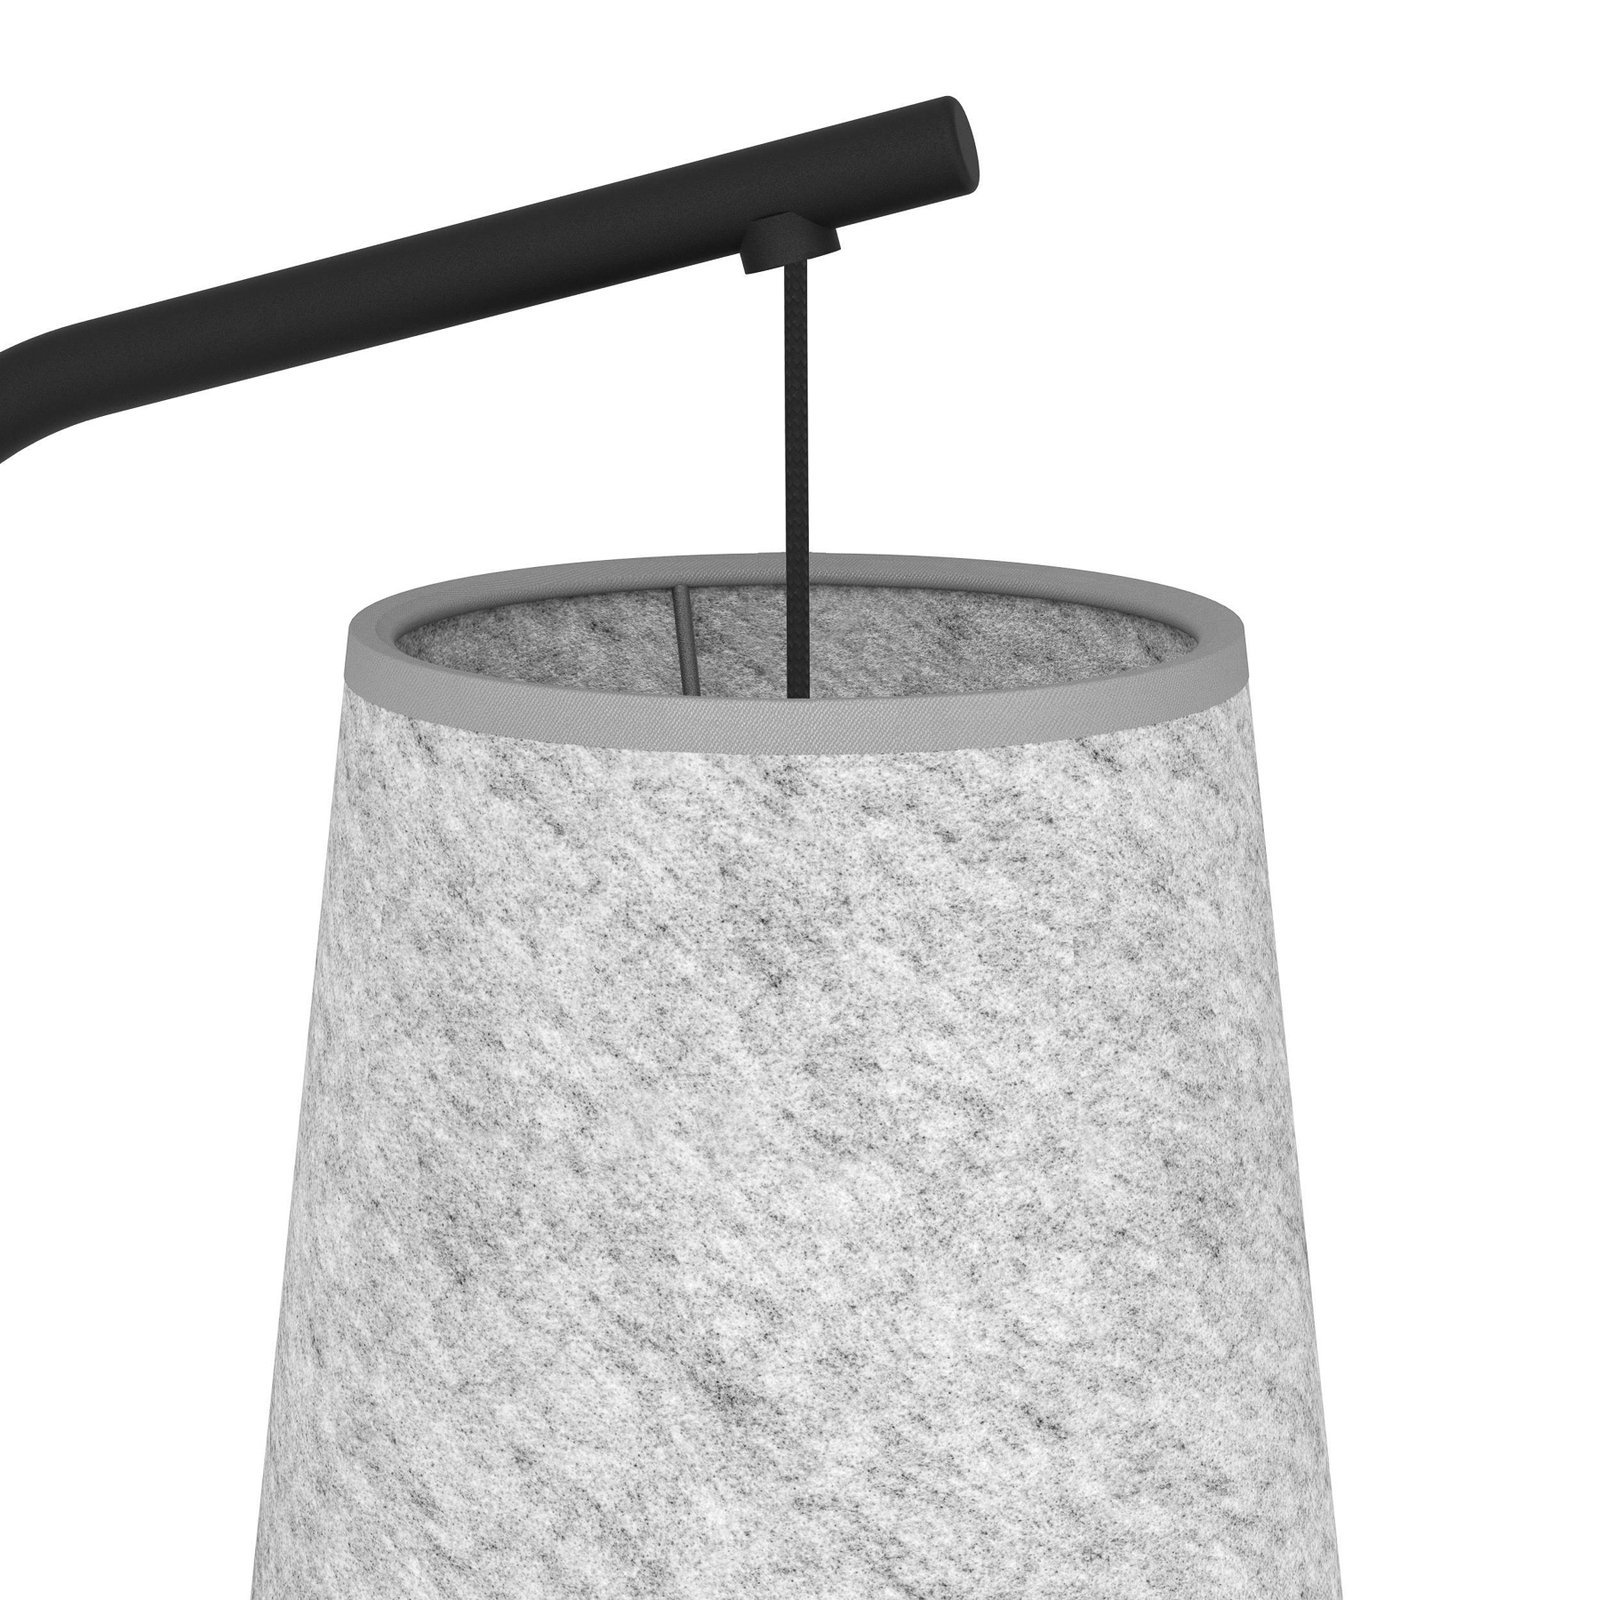 Alsager floor lamp with a felt lampshade